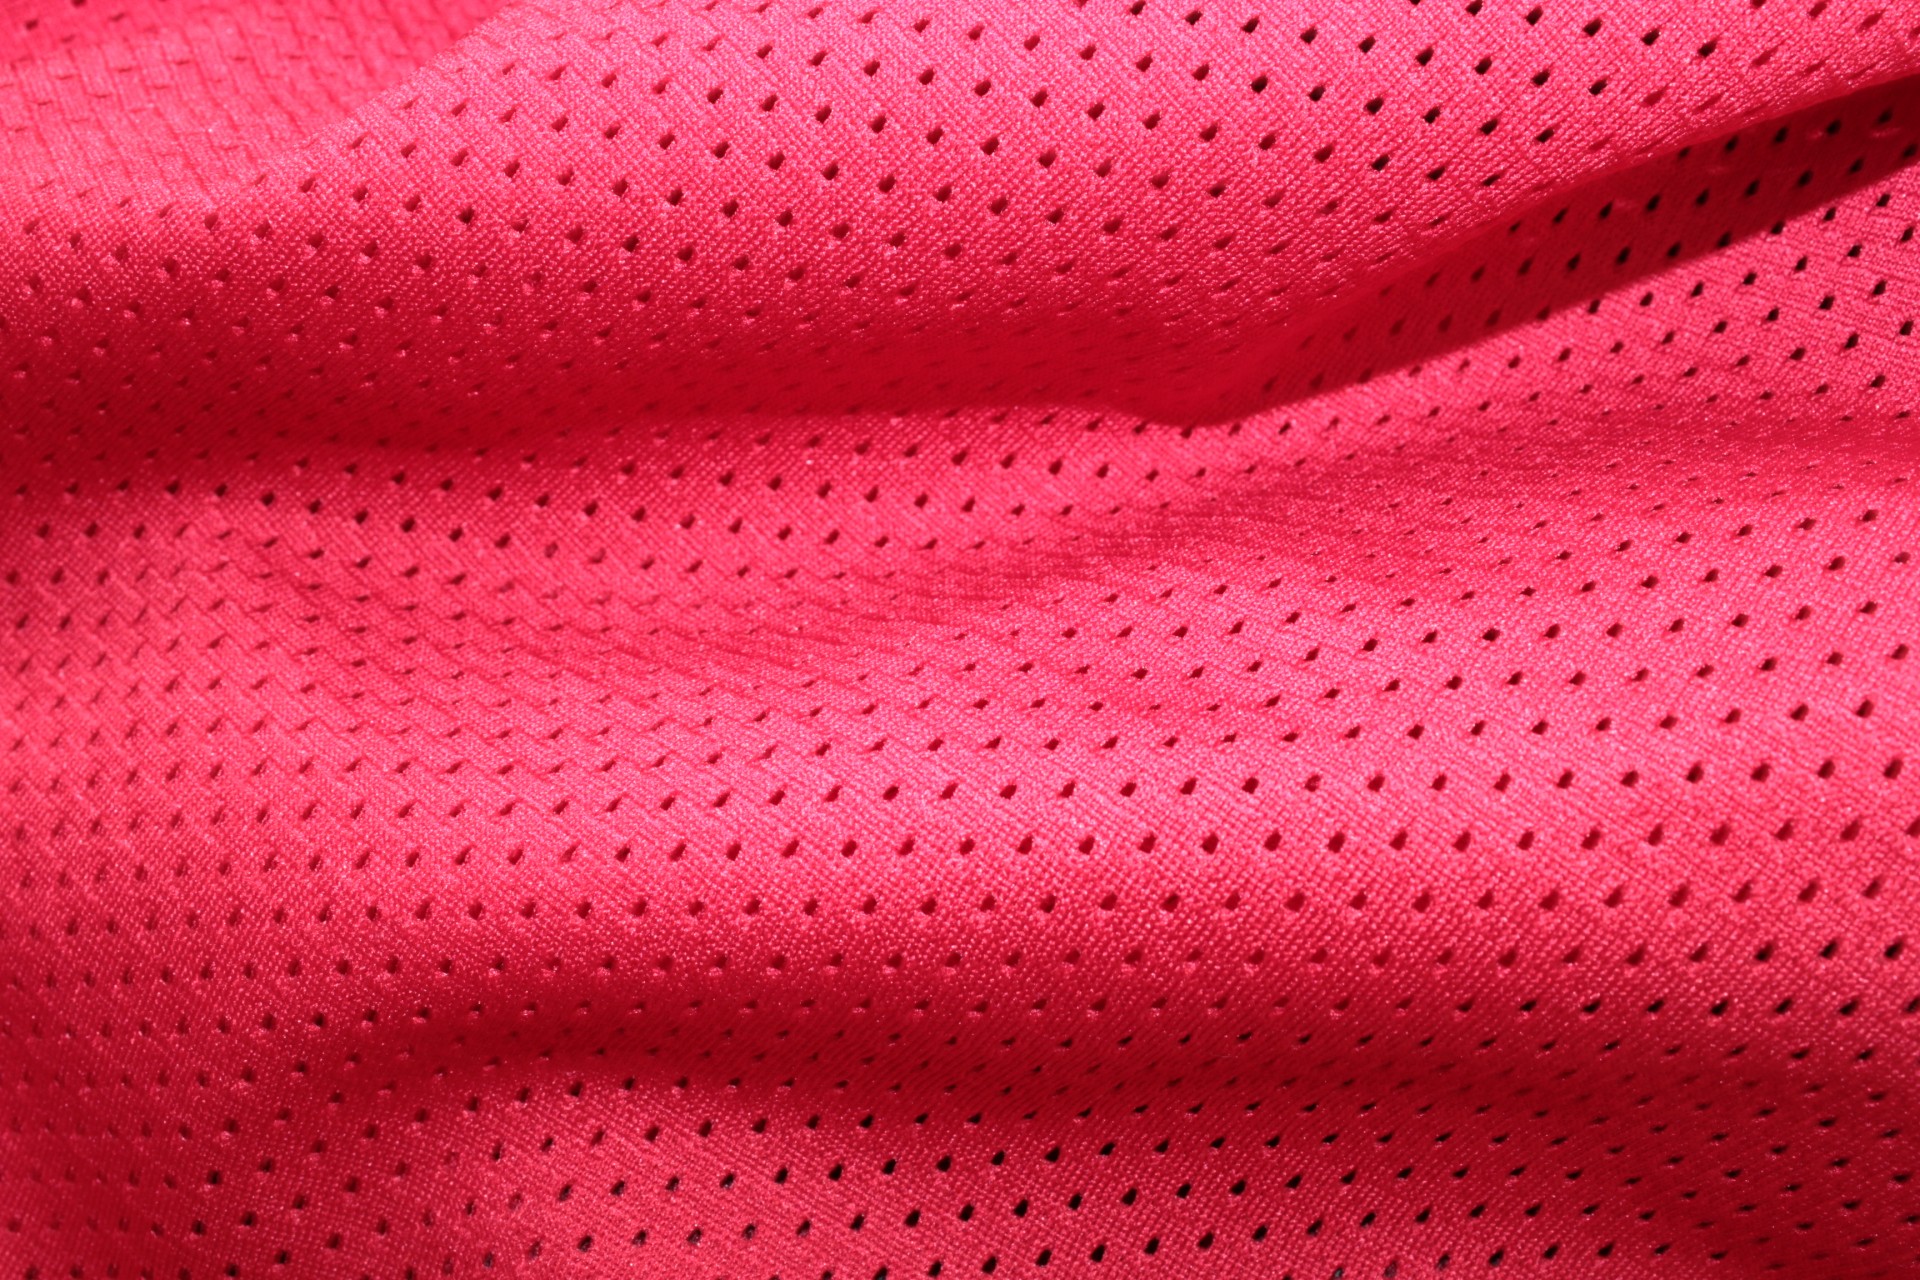 Fuchsia Pink Jersey Cloth Free Stock Photo - Public Domain Pictures